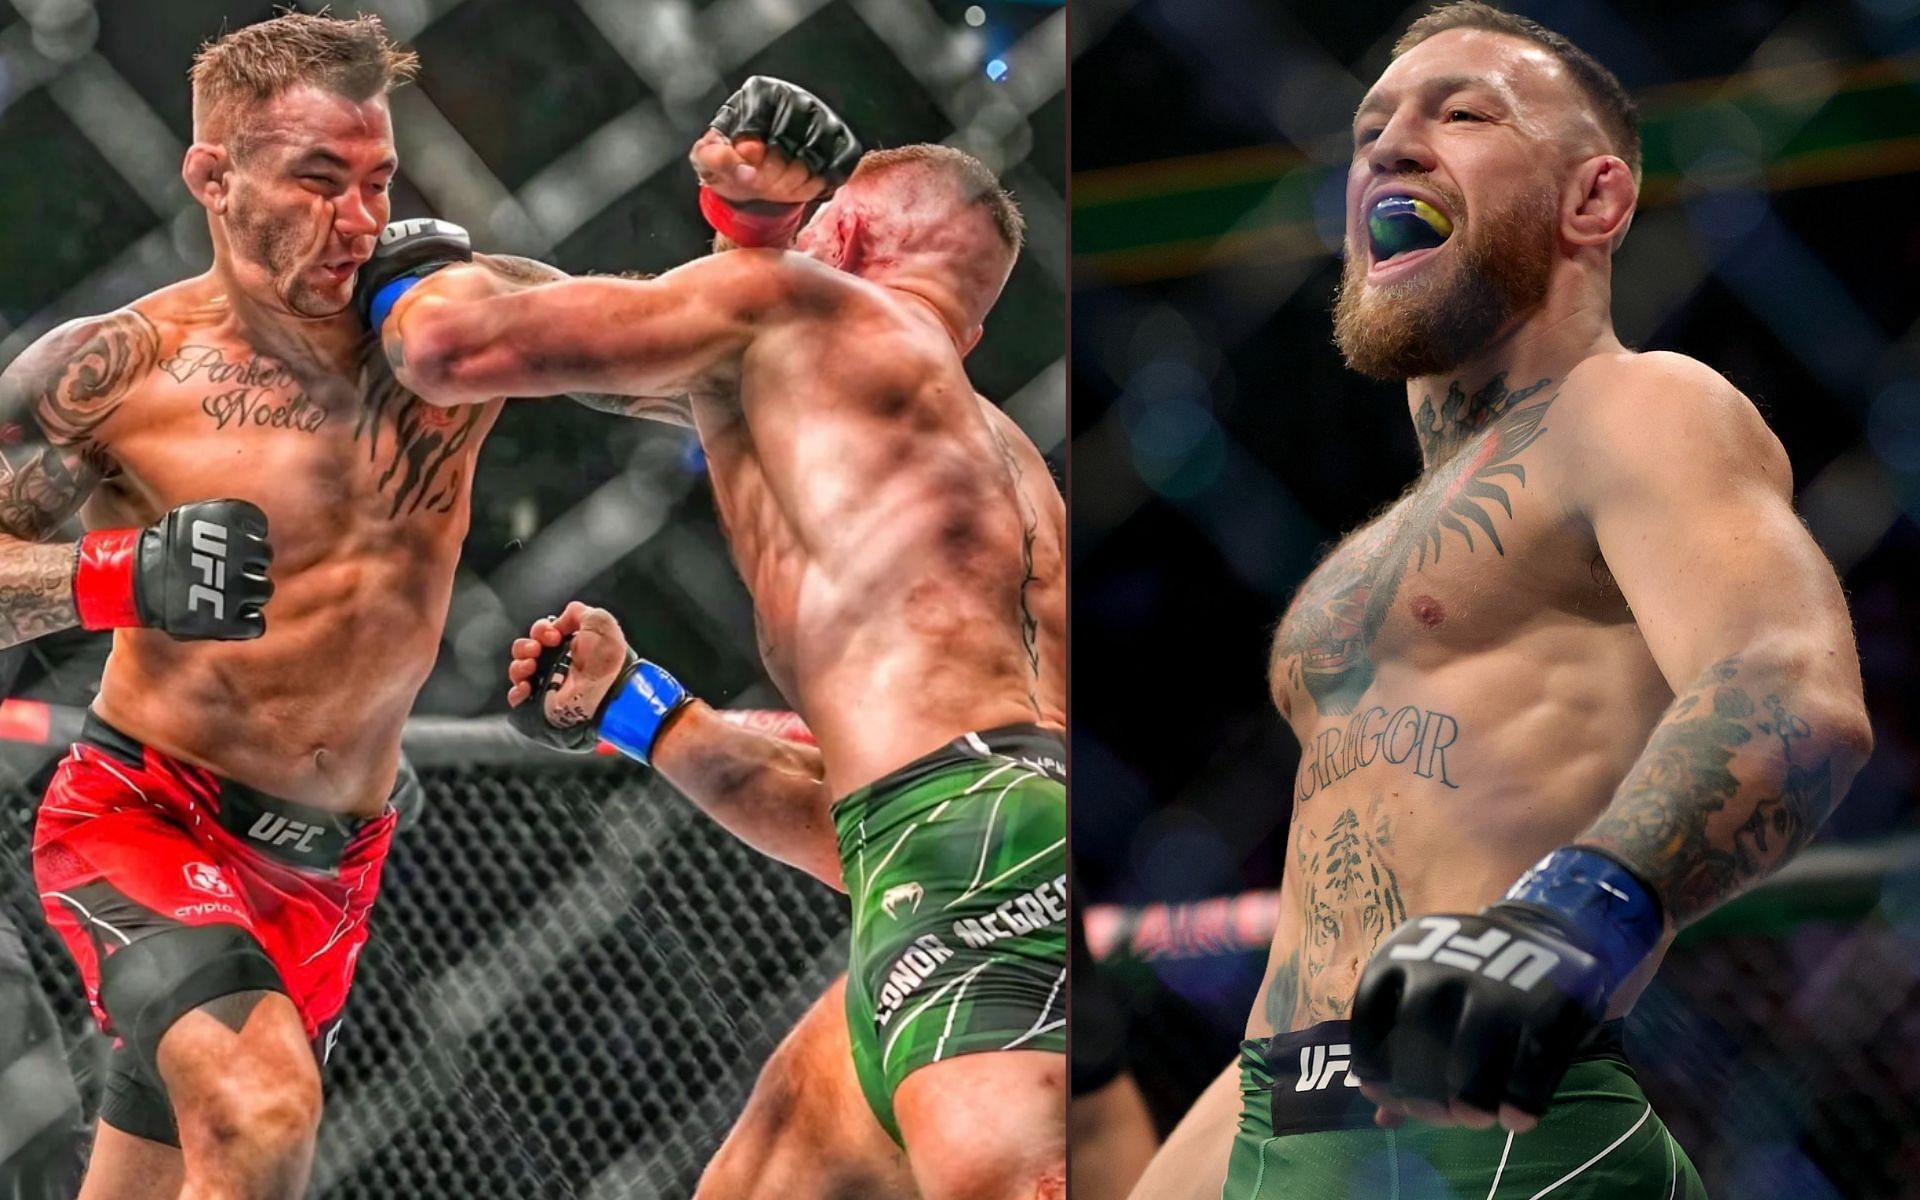 Dustin Poirier (left), Conor McGregor (right) [Image courtesy of @thenotoriousmma on Twitter]